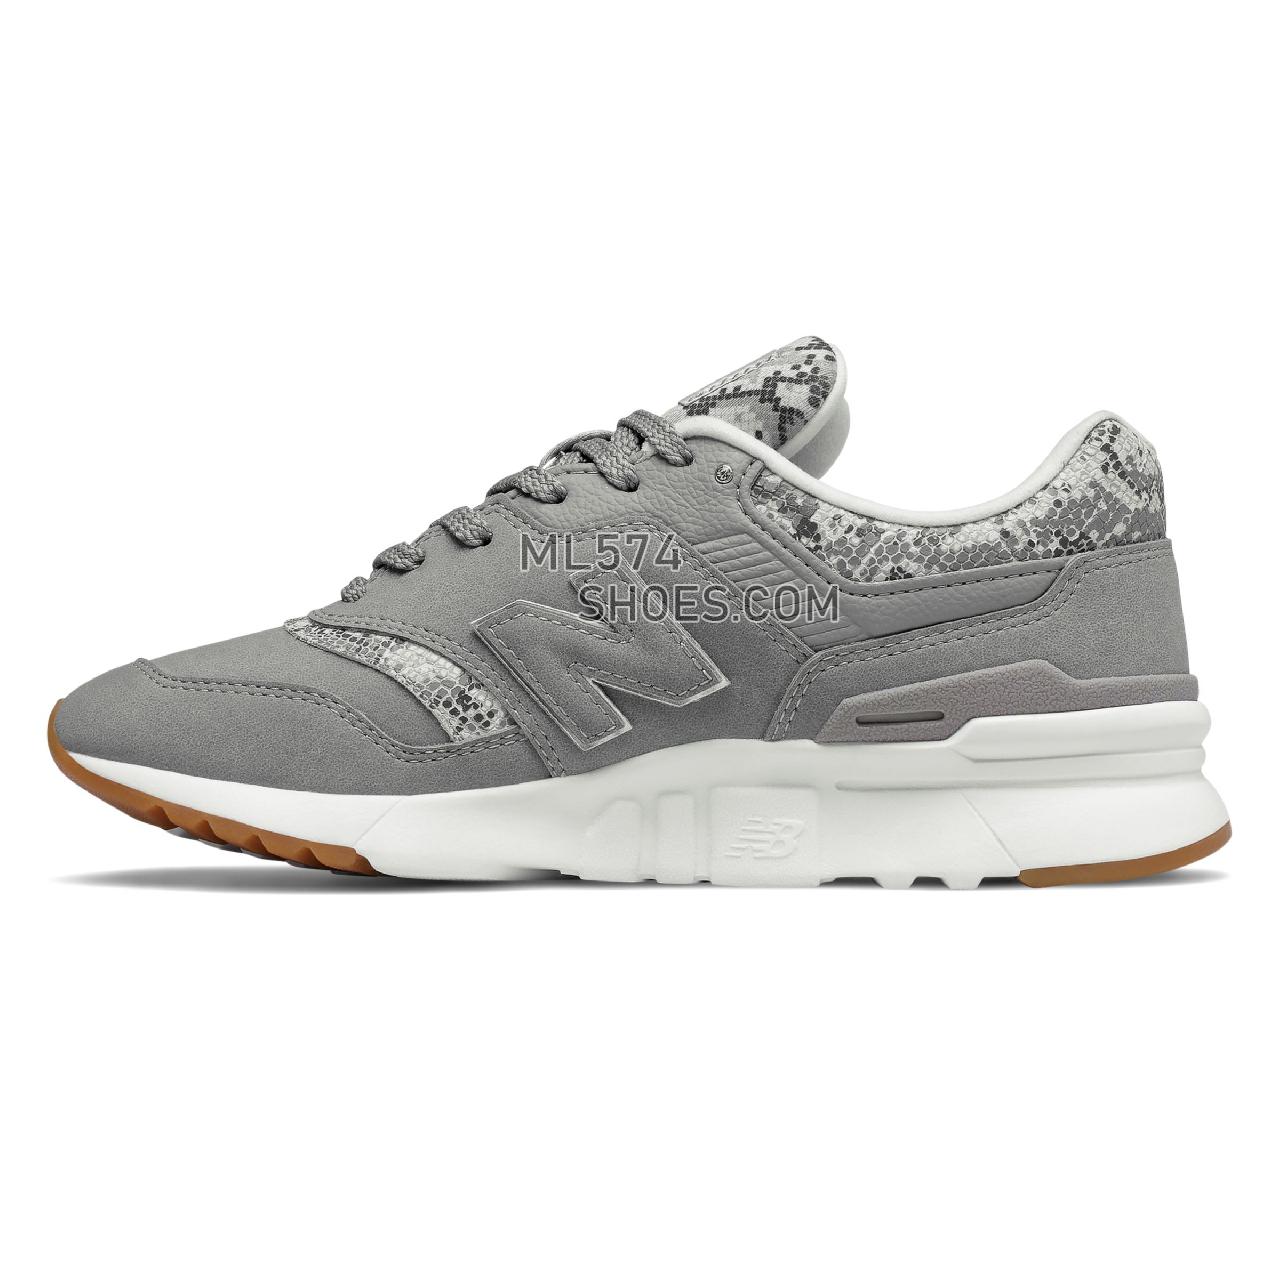 New Balance 997H - Women's Classic Sneakers - Marblehead with Gum - CW997HCG